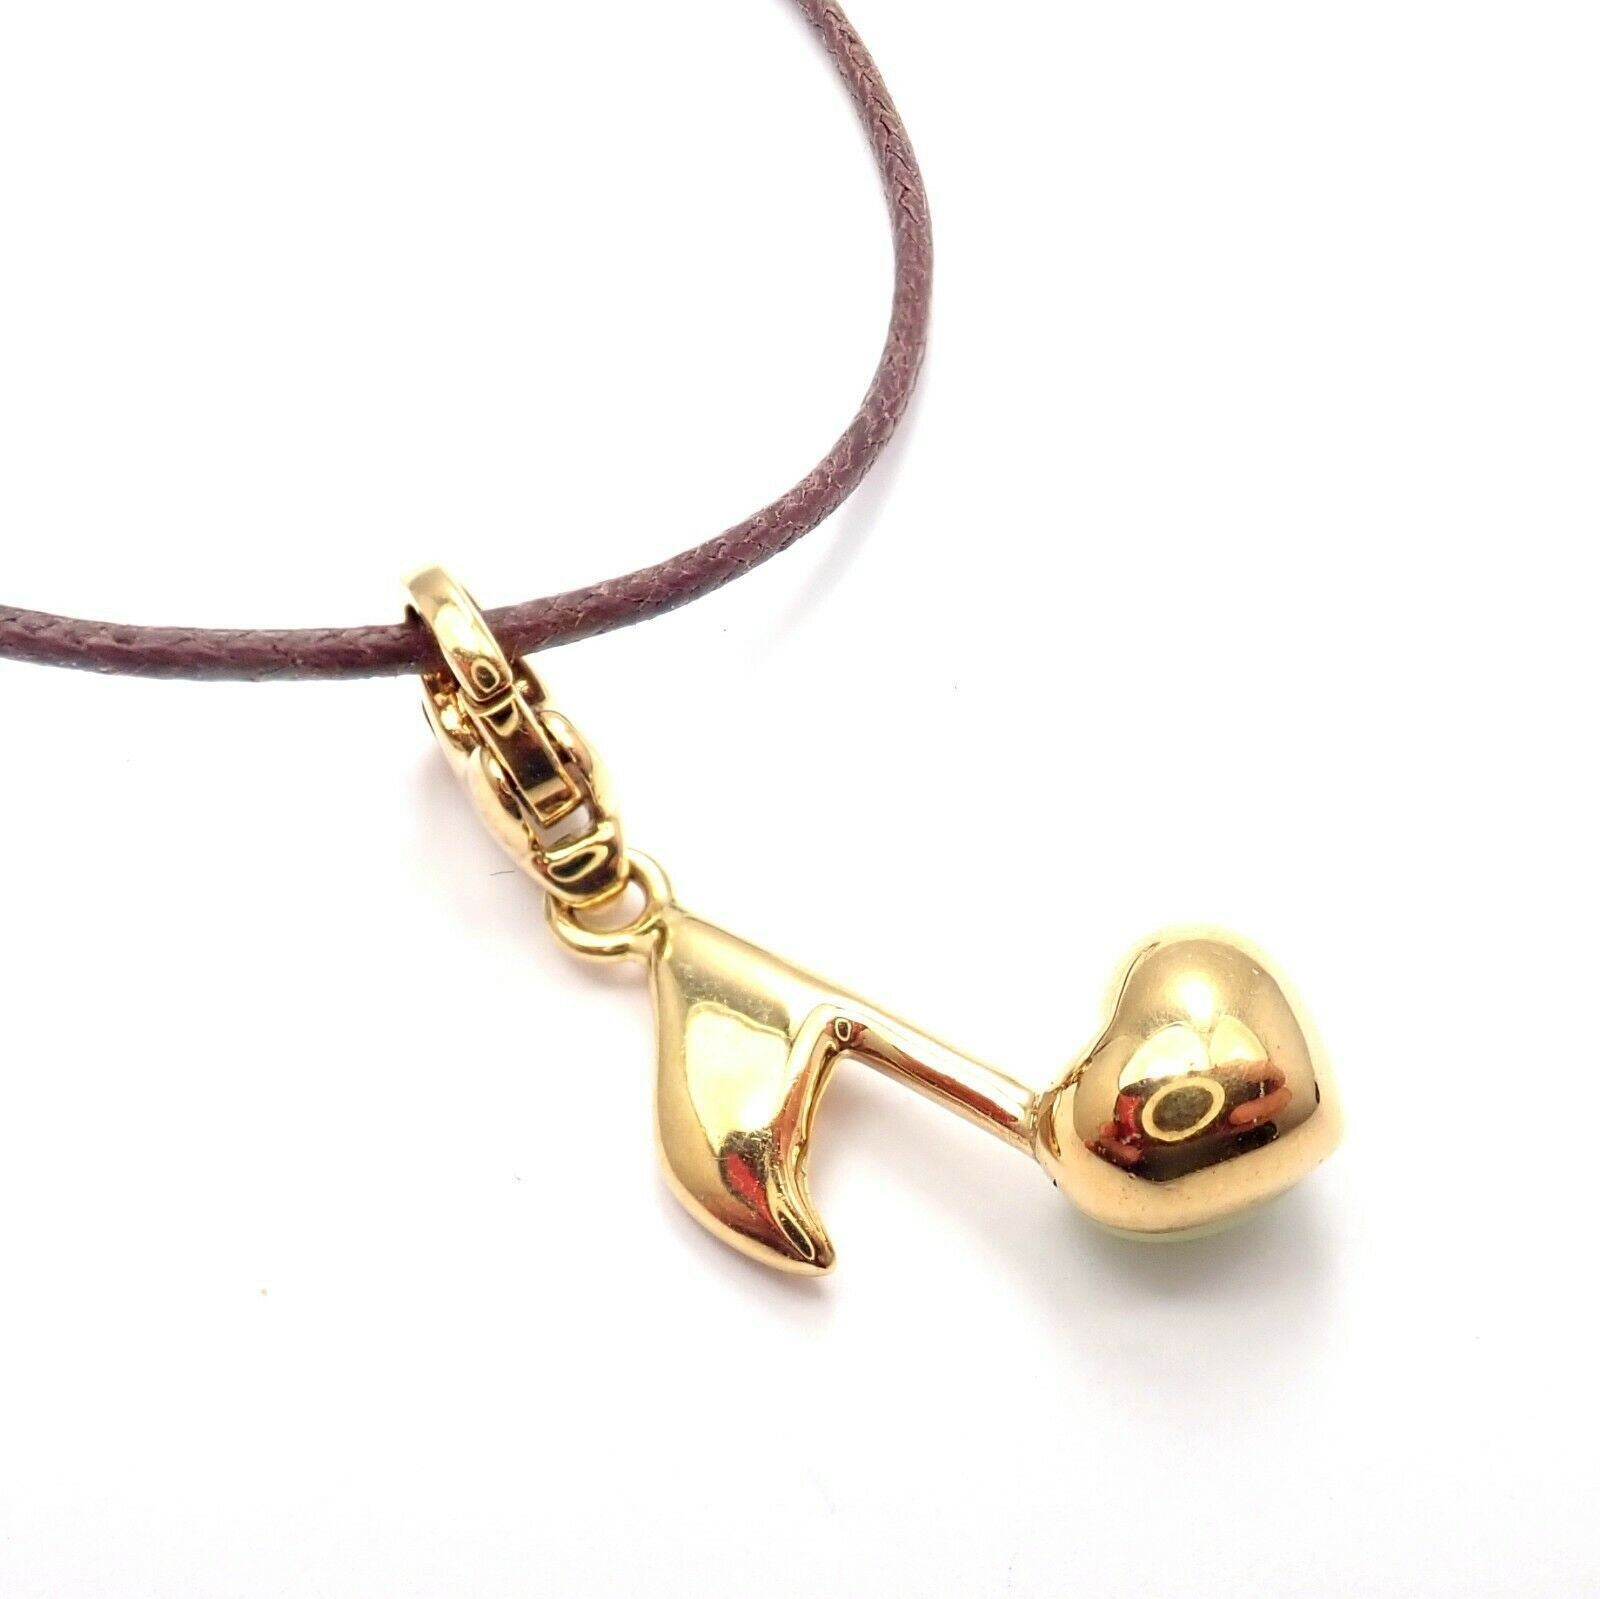 Pasquale Bruni Jewelry & Watches:Fine Jewelry:Necklaces & Pendants Pasquale Bruni 18k Yellow Gold 0.08ctw Diamond Enamel Music Note Charm Necklace